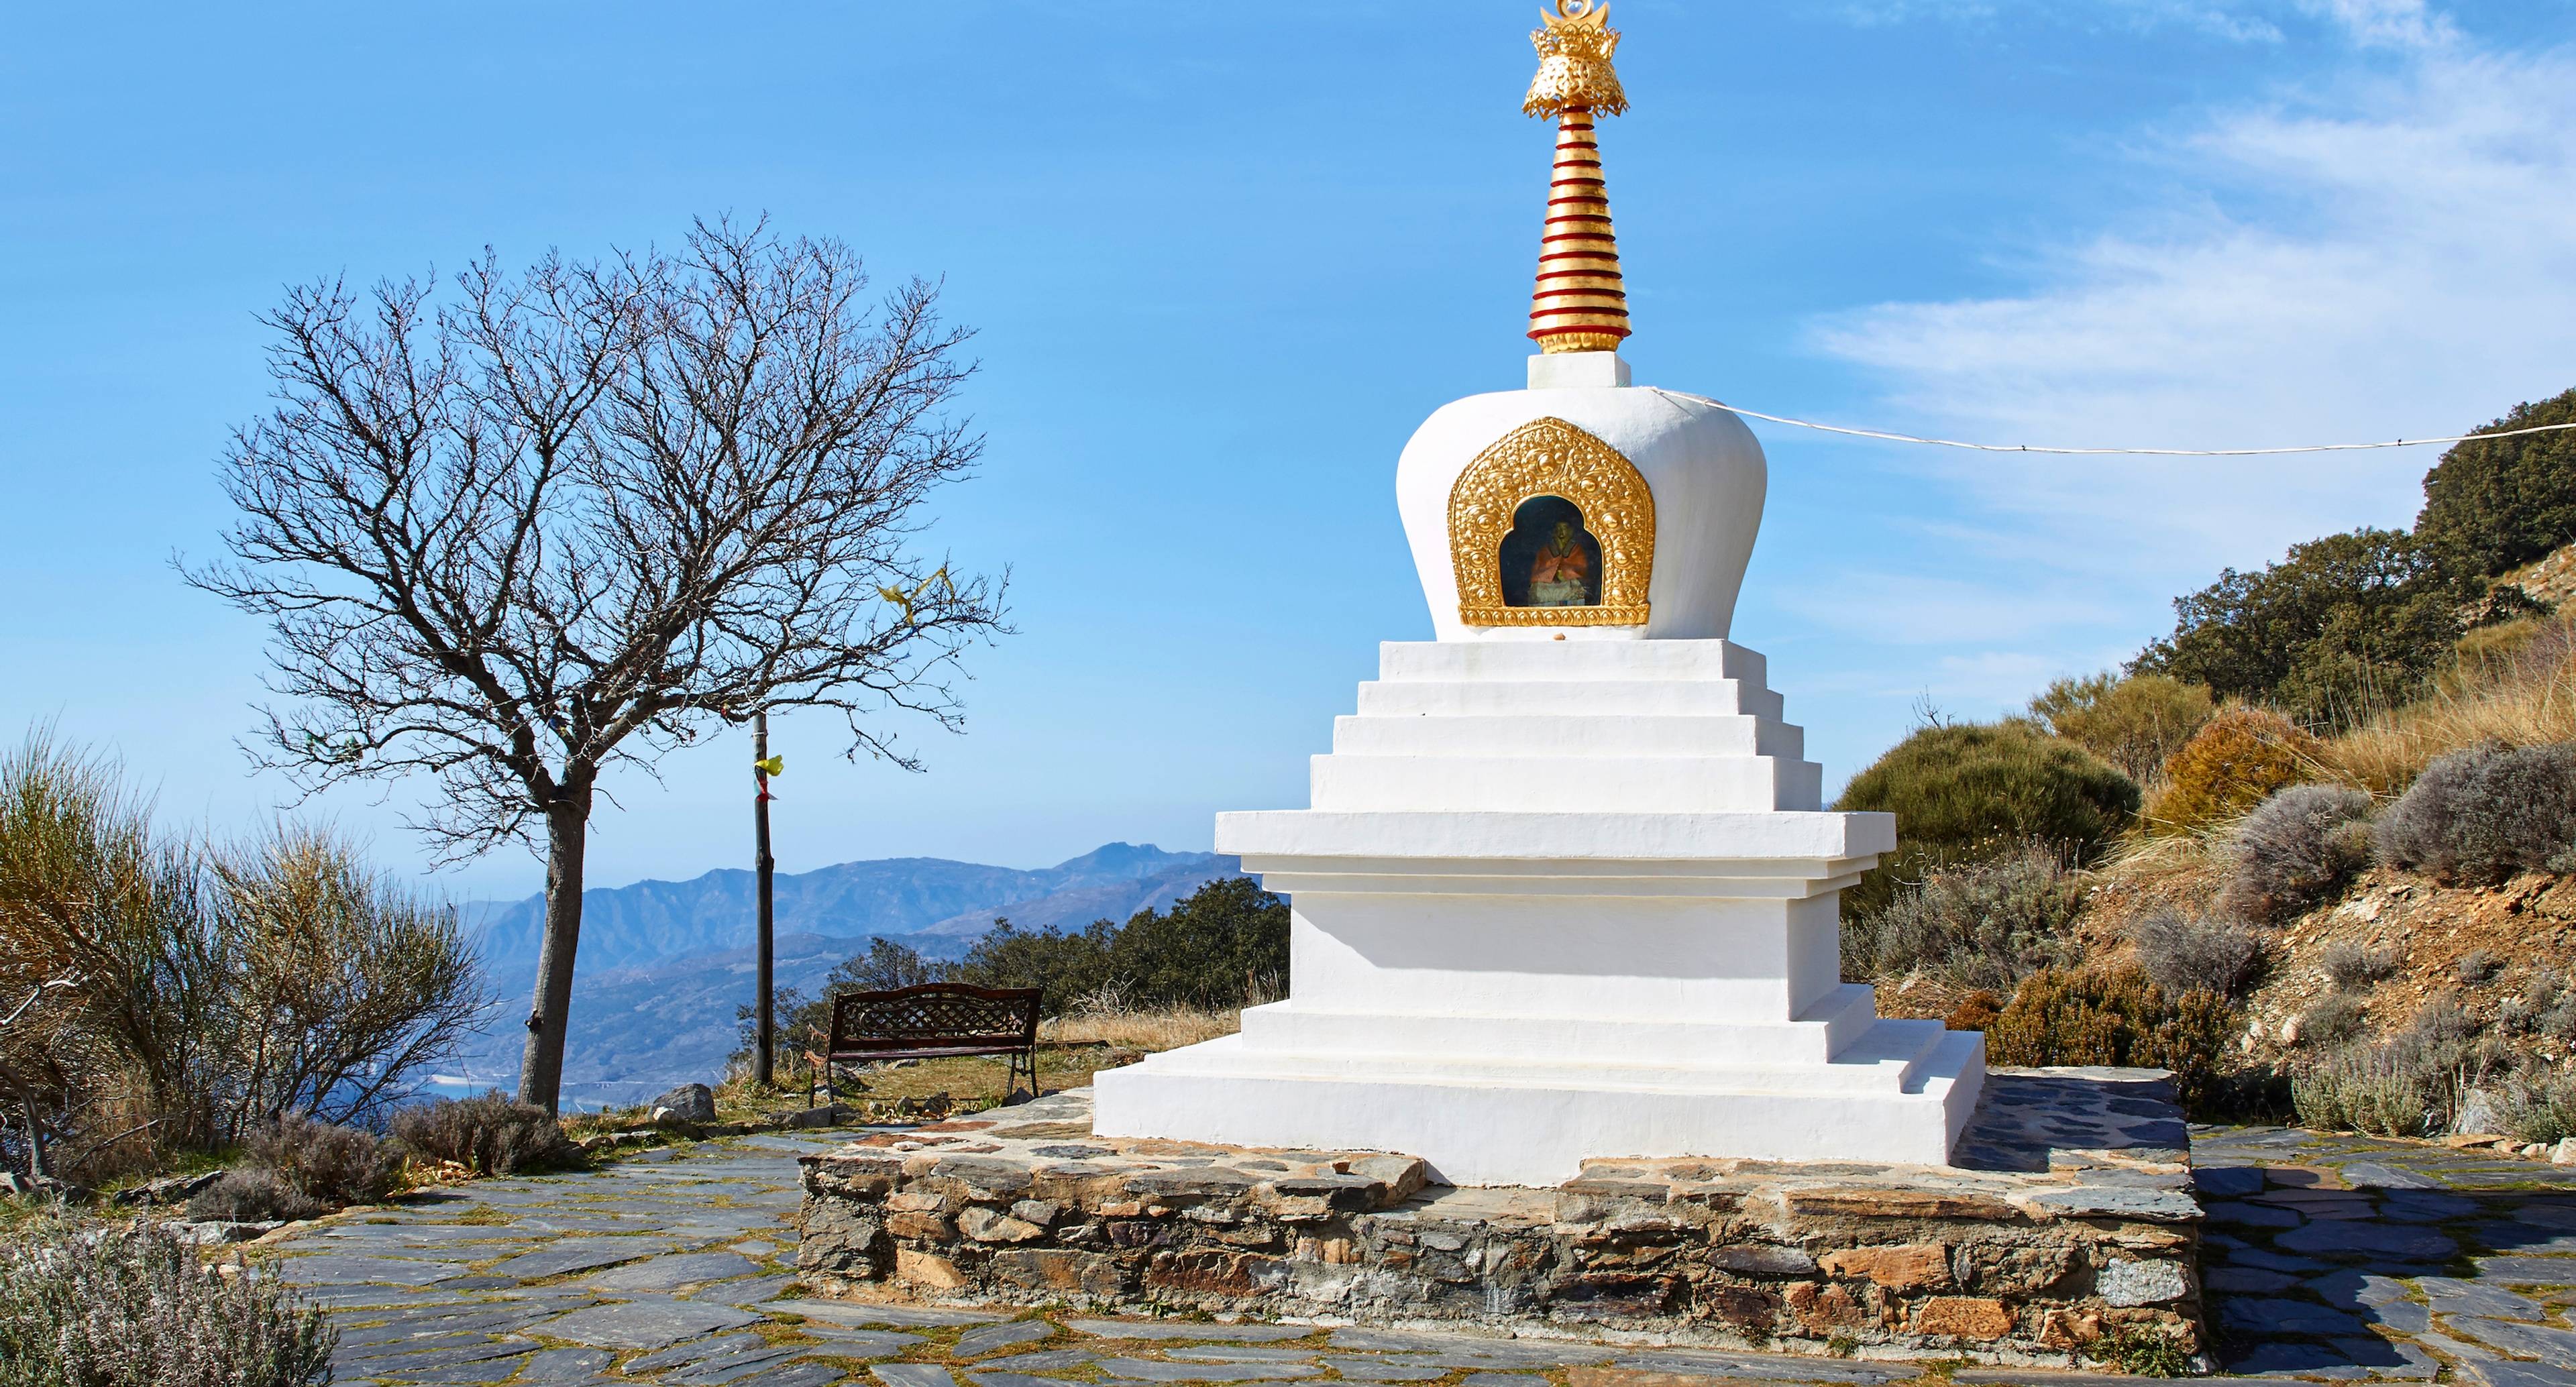 Trekking and Peace in a Buddhist Temple 